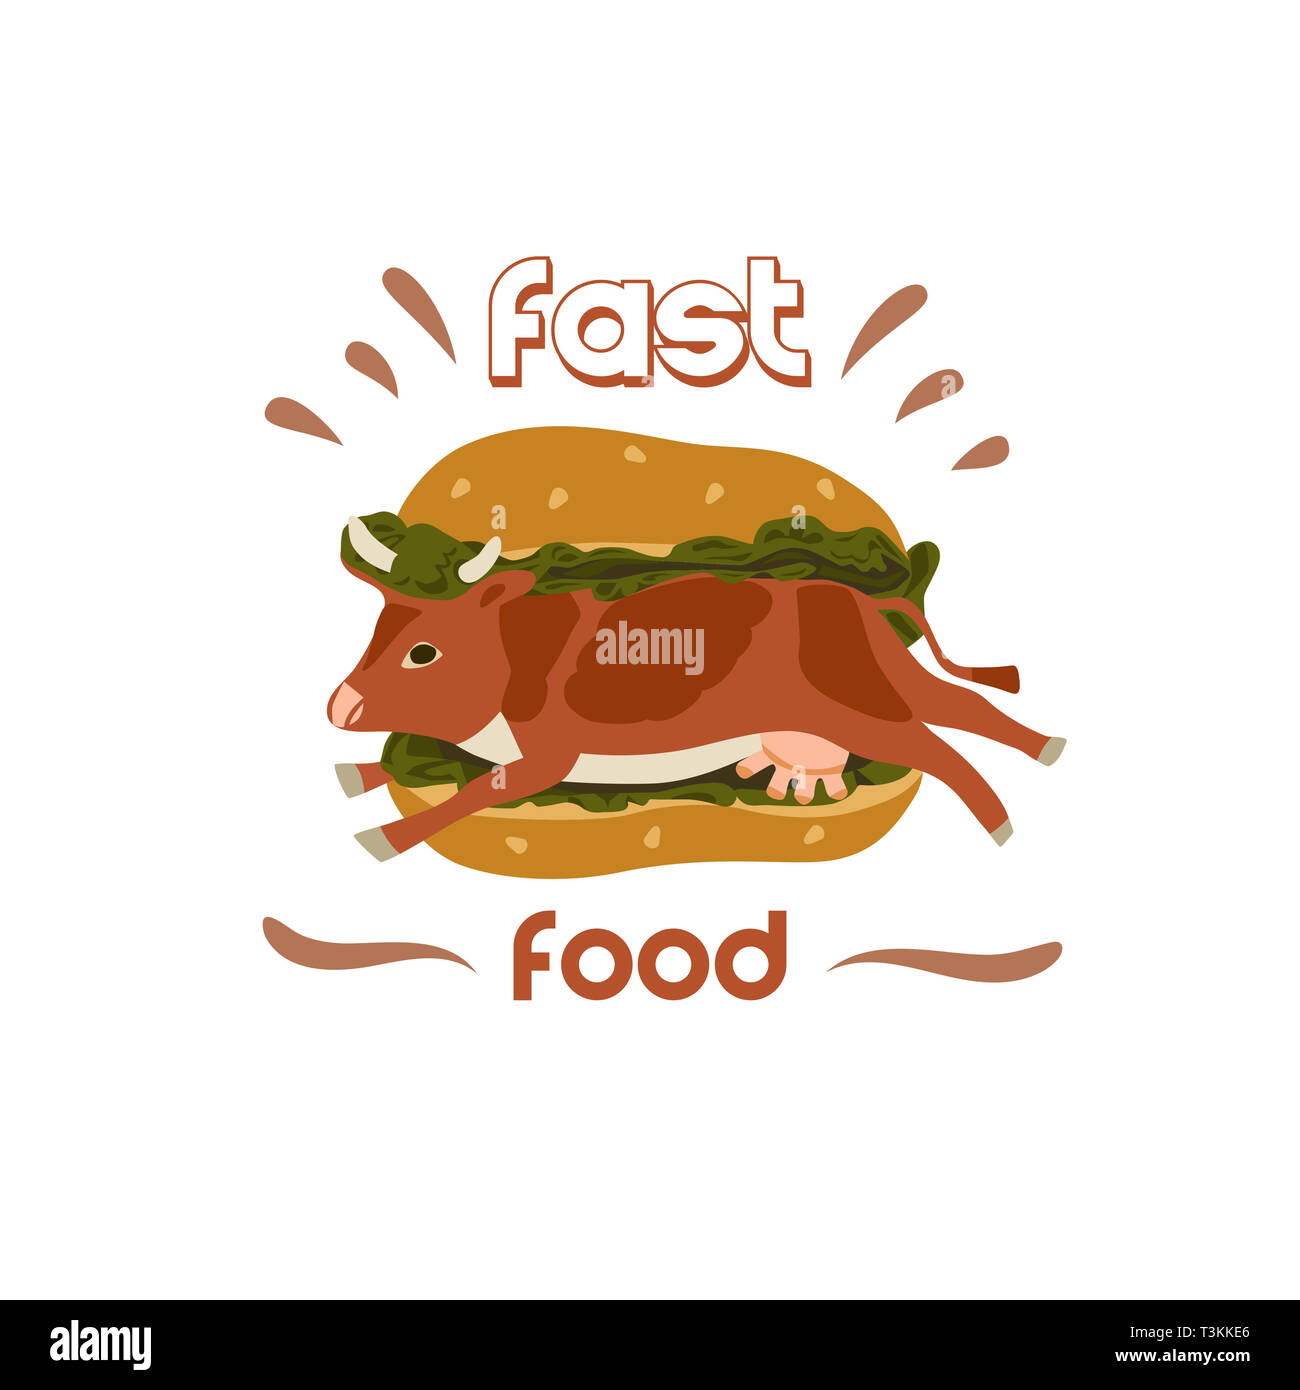 Fast food. Burger with beef and lettuce. Protest of vegetarianism. Animal protection concept. Flat illustration with text. Stock Photo